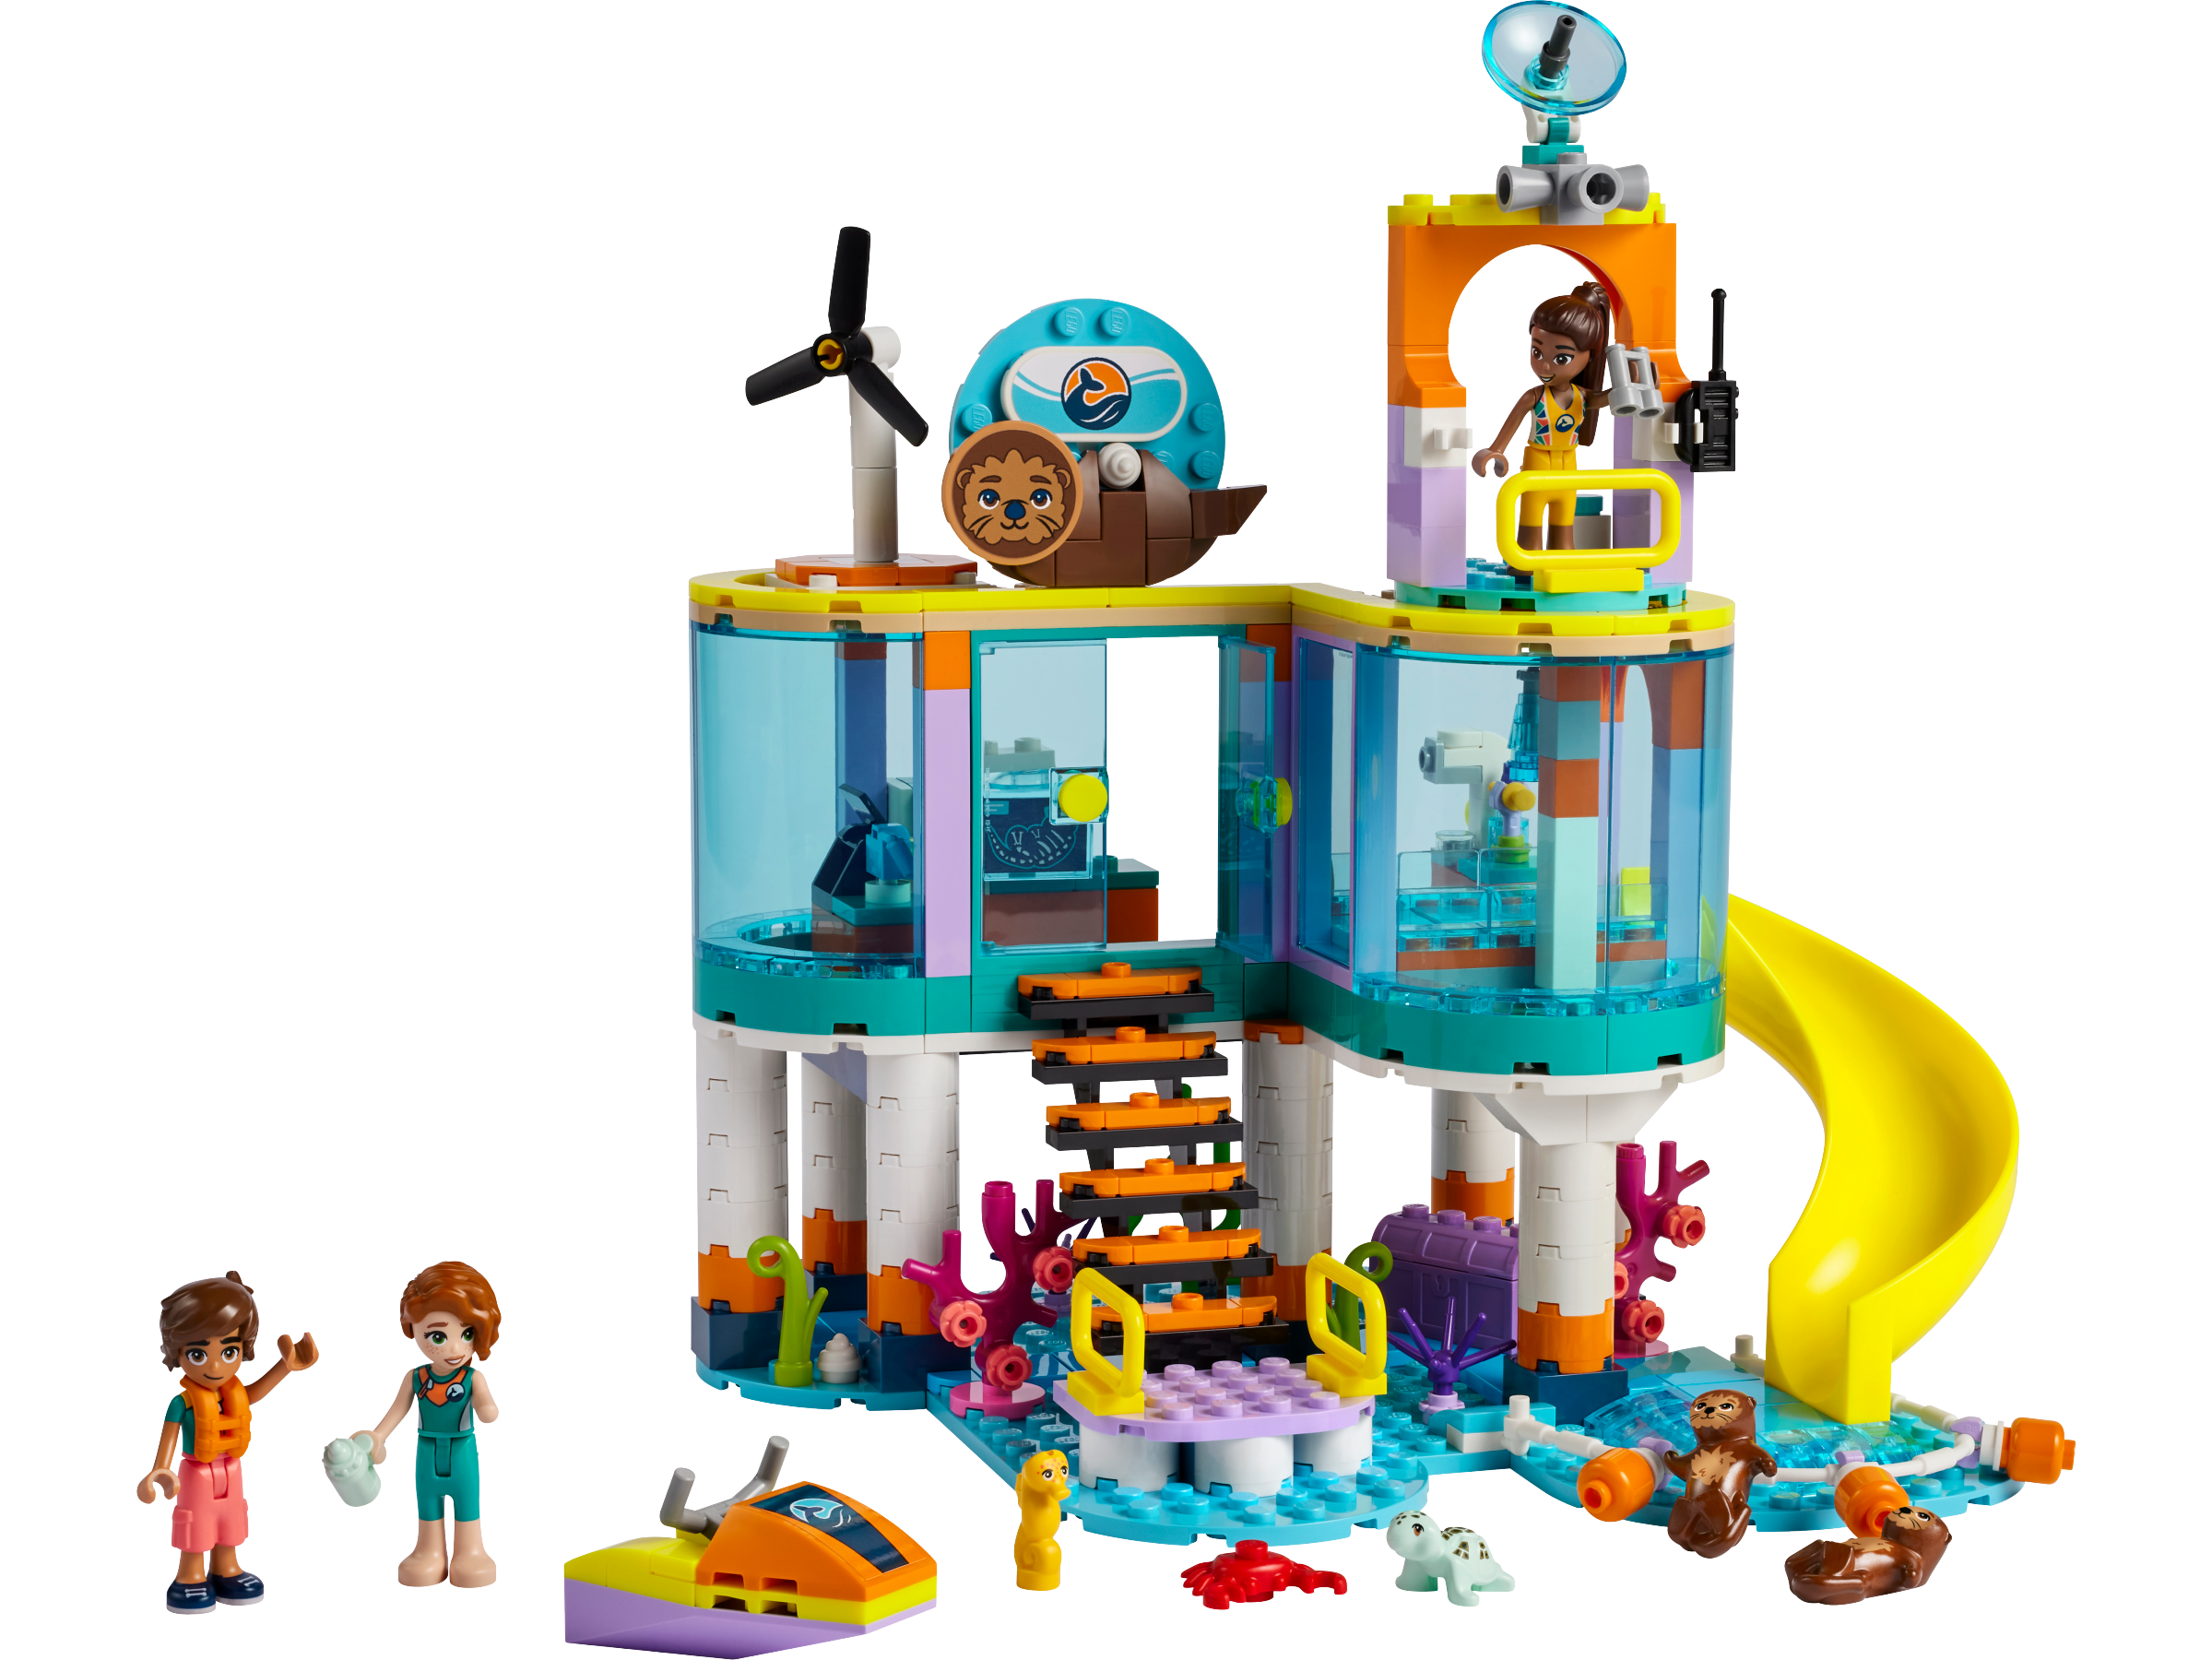 Sea Rescue 41736 | Friends Buy online at the Official LEGO® Shop